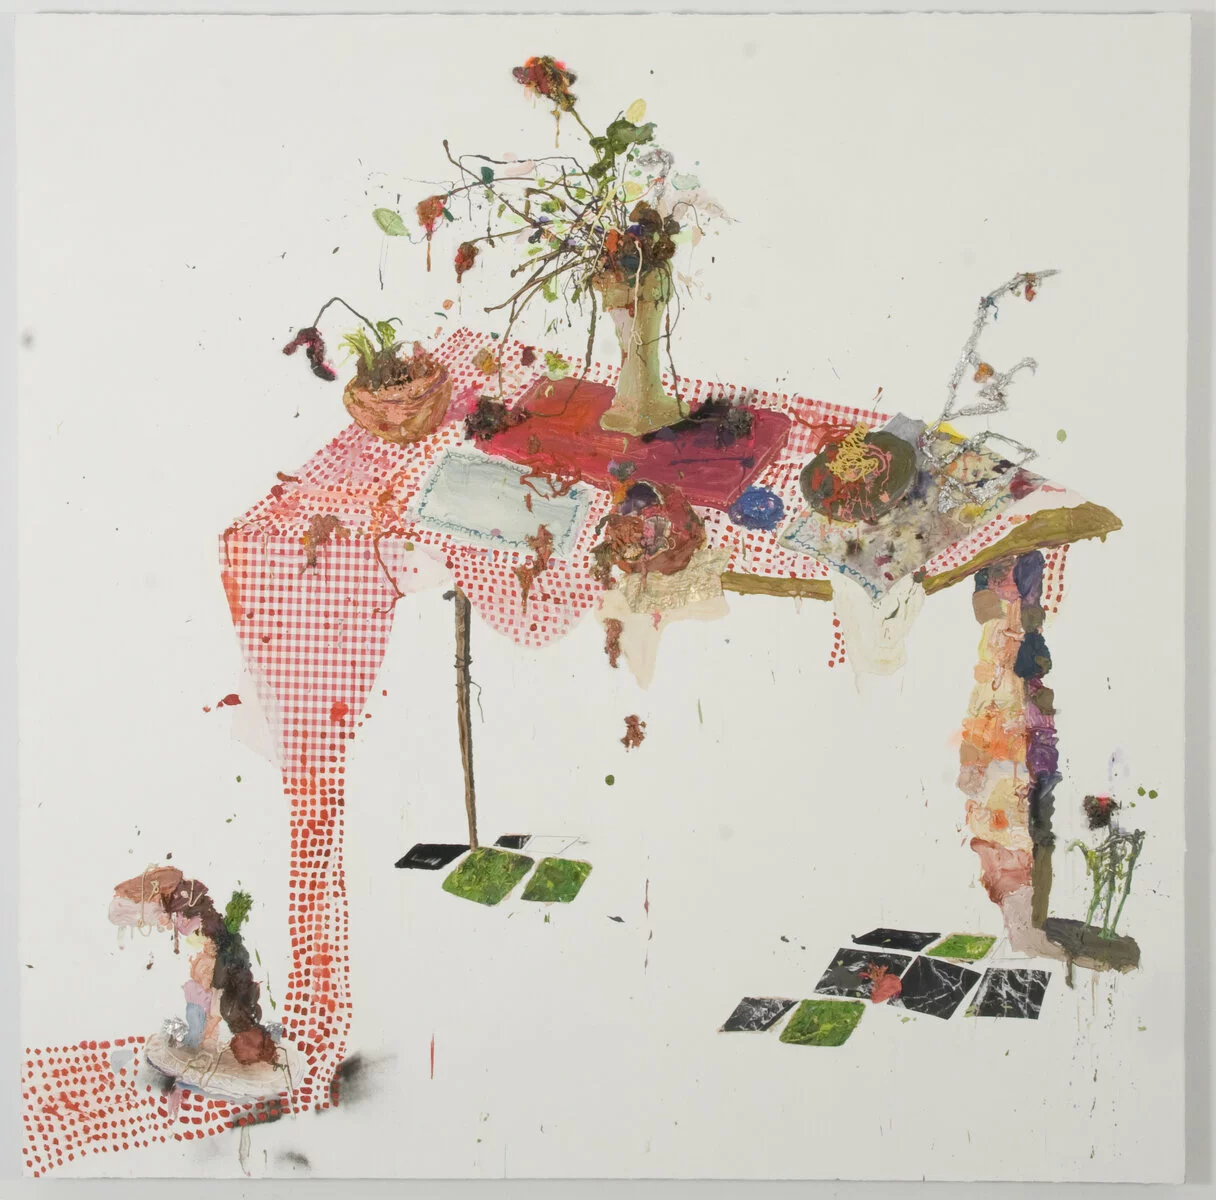 Ángel Otero (b. 1981 Santurce, Puerto Rico; lives in New York, NY), <em>Exquisito</em>, 2010. Oil paint and fabric collaged on canvas; 84 x 84 in. (213.36 x 213.36 cm). Campolieto Family Collection. Image courtesy of the artist. 2023/05/2009_Exquisito_1.jpg 